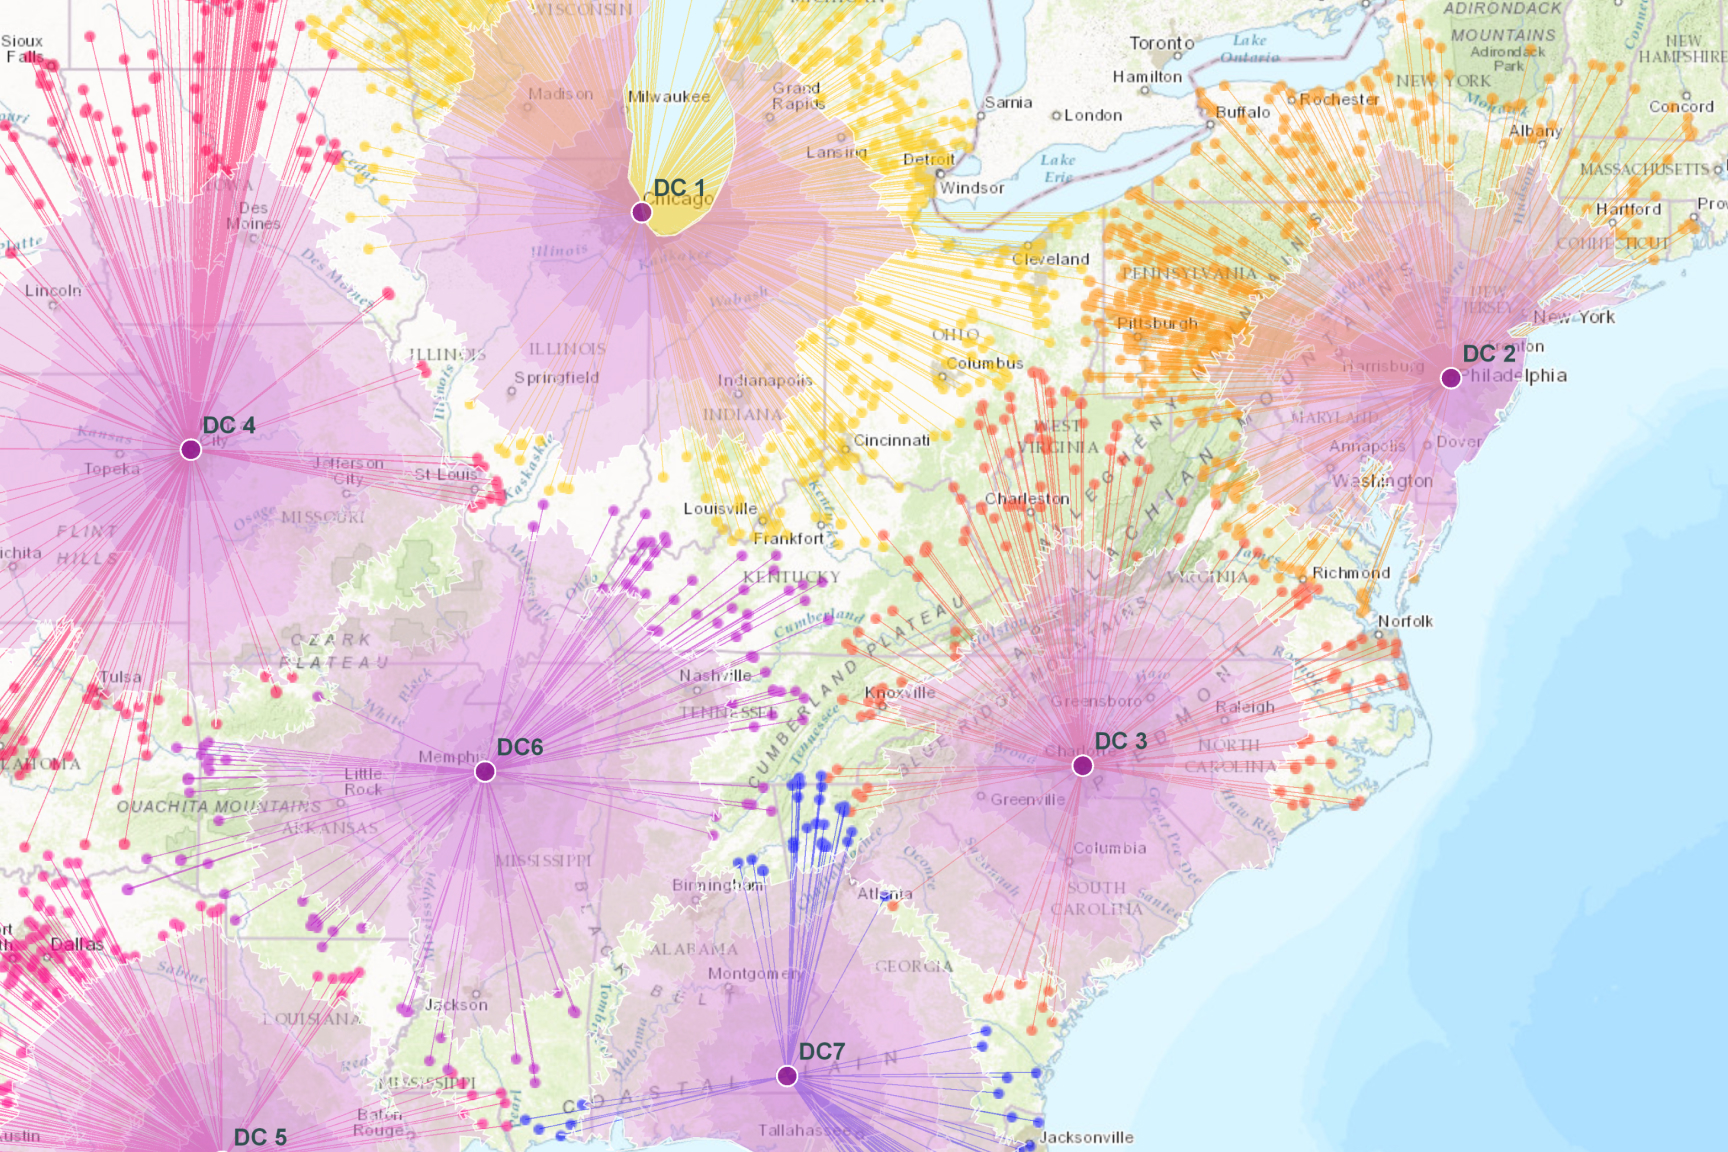 Colorful map images with various lines and data points.